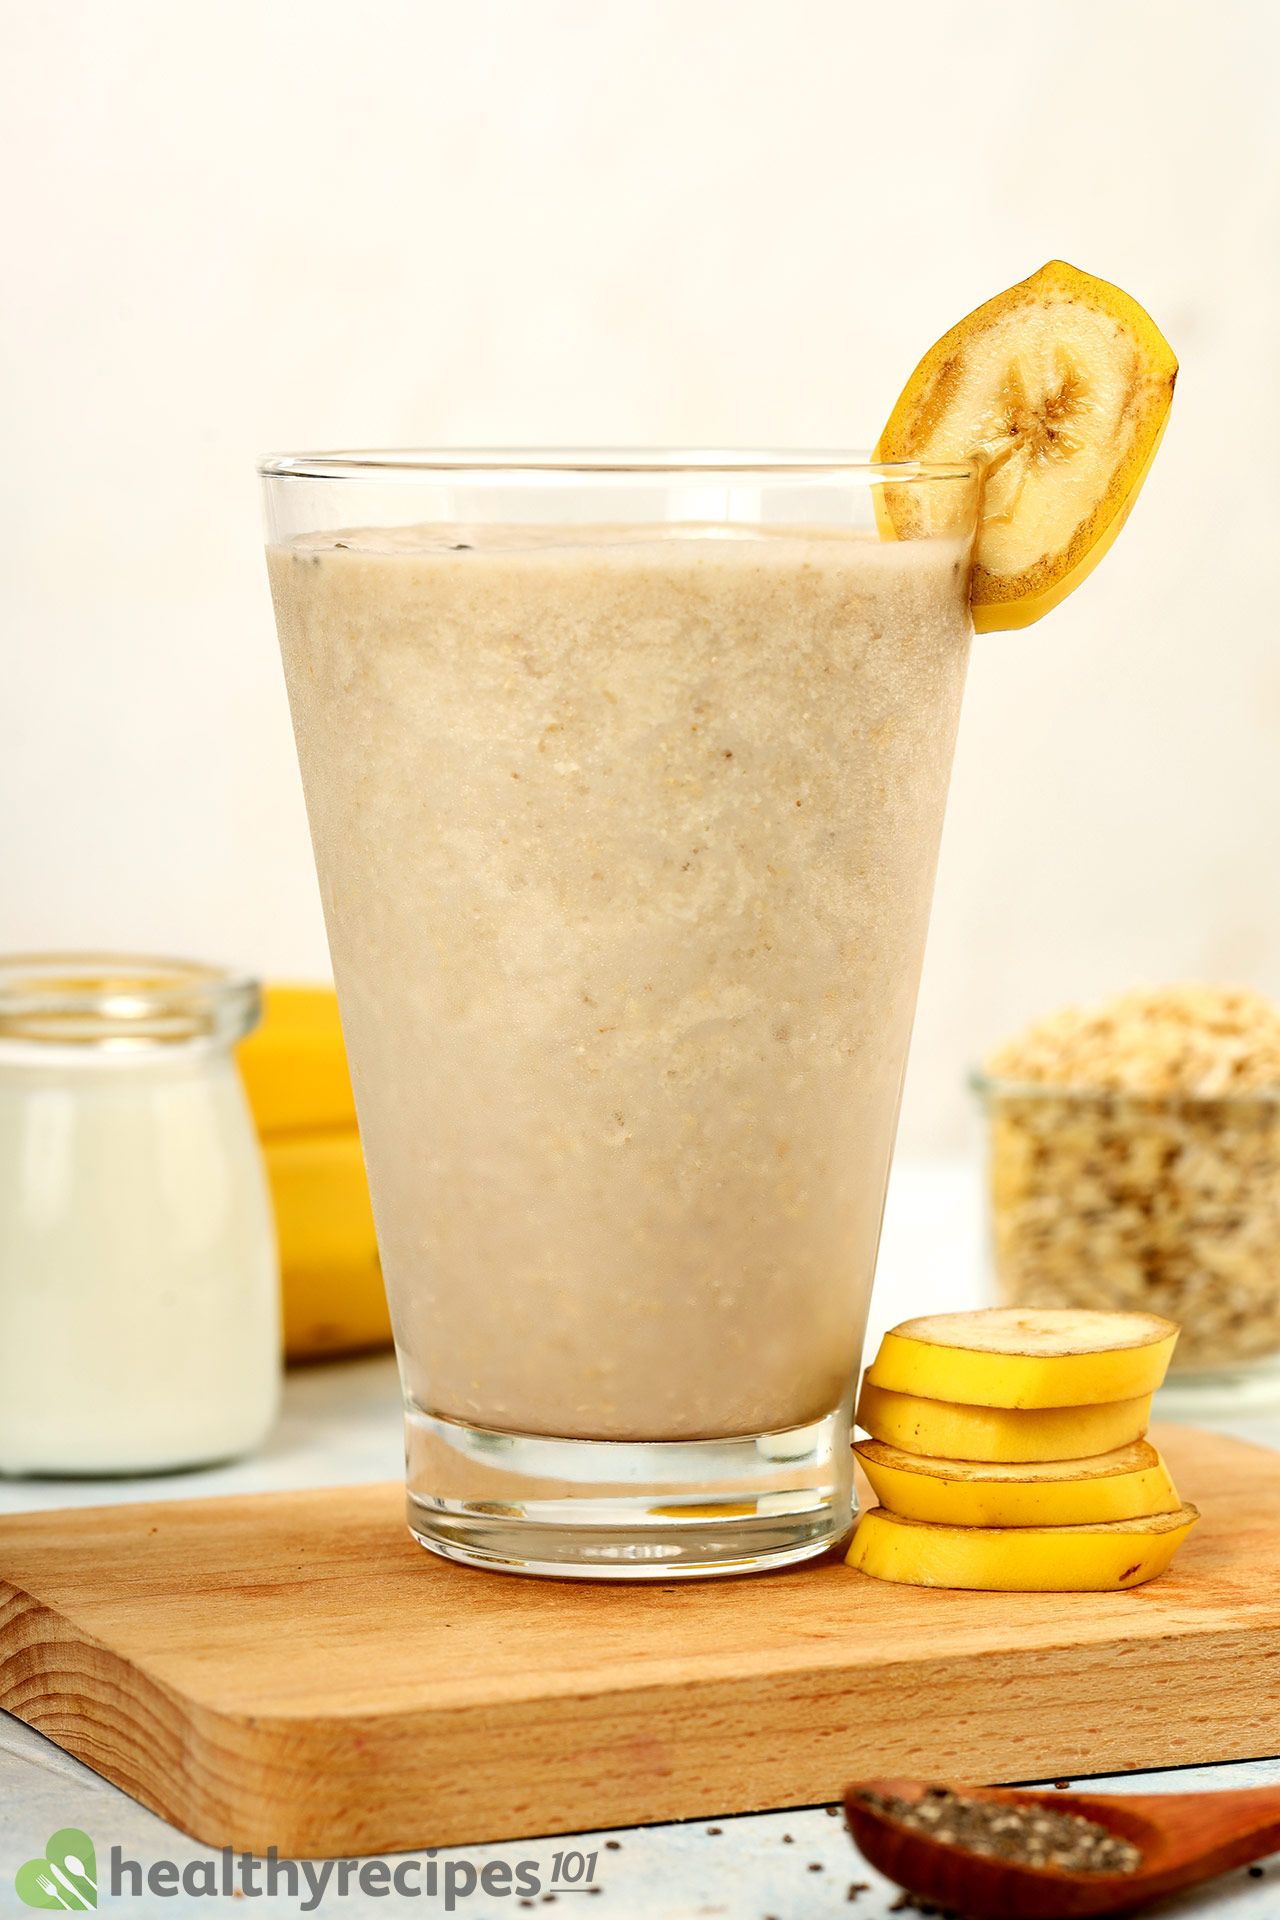 Homemade Peanut Butter Oatmeal Smoothie Recipe